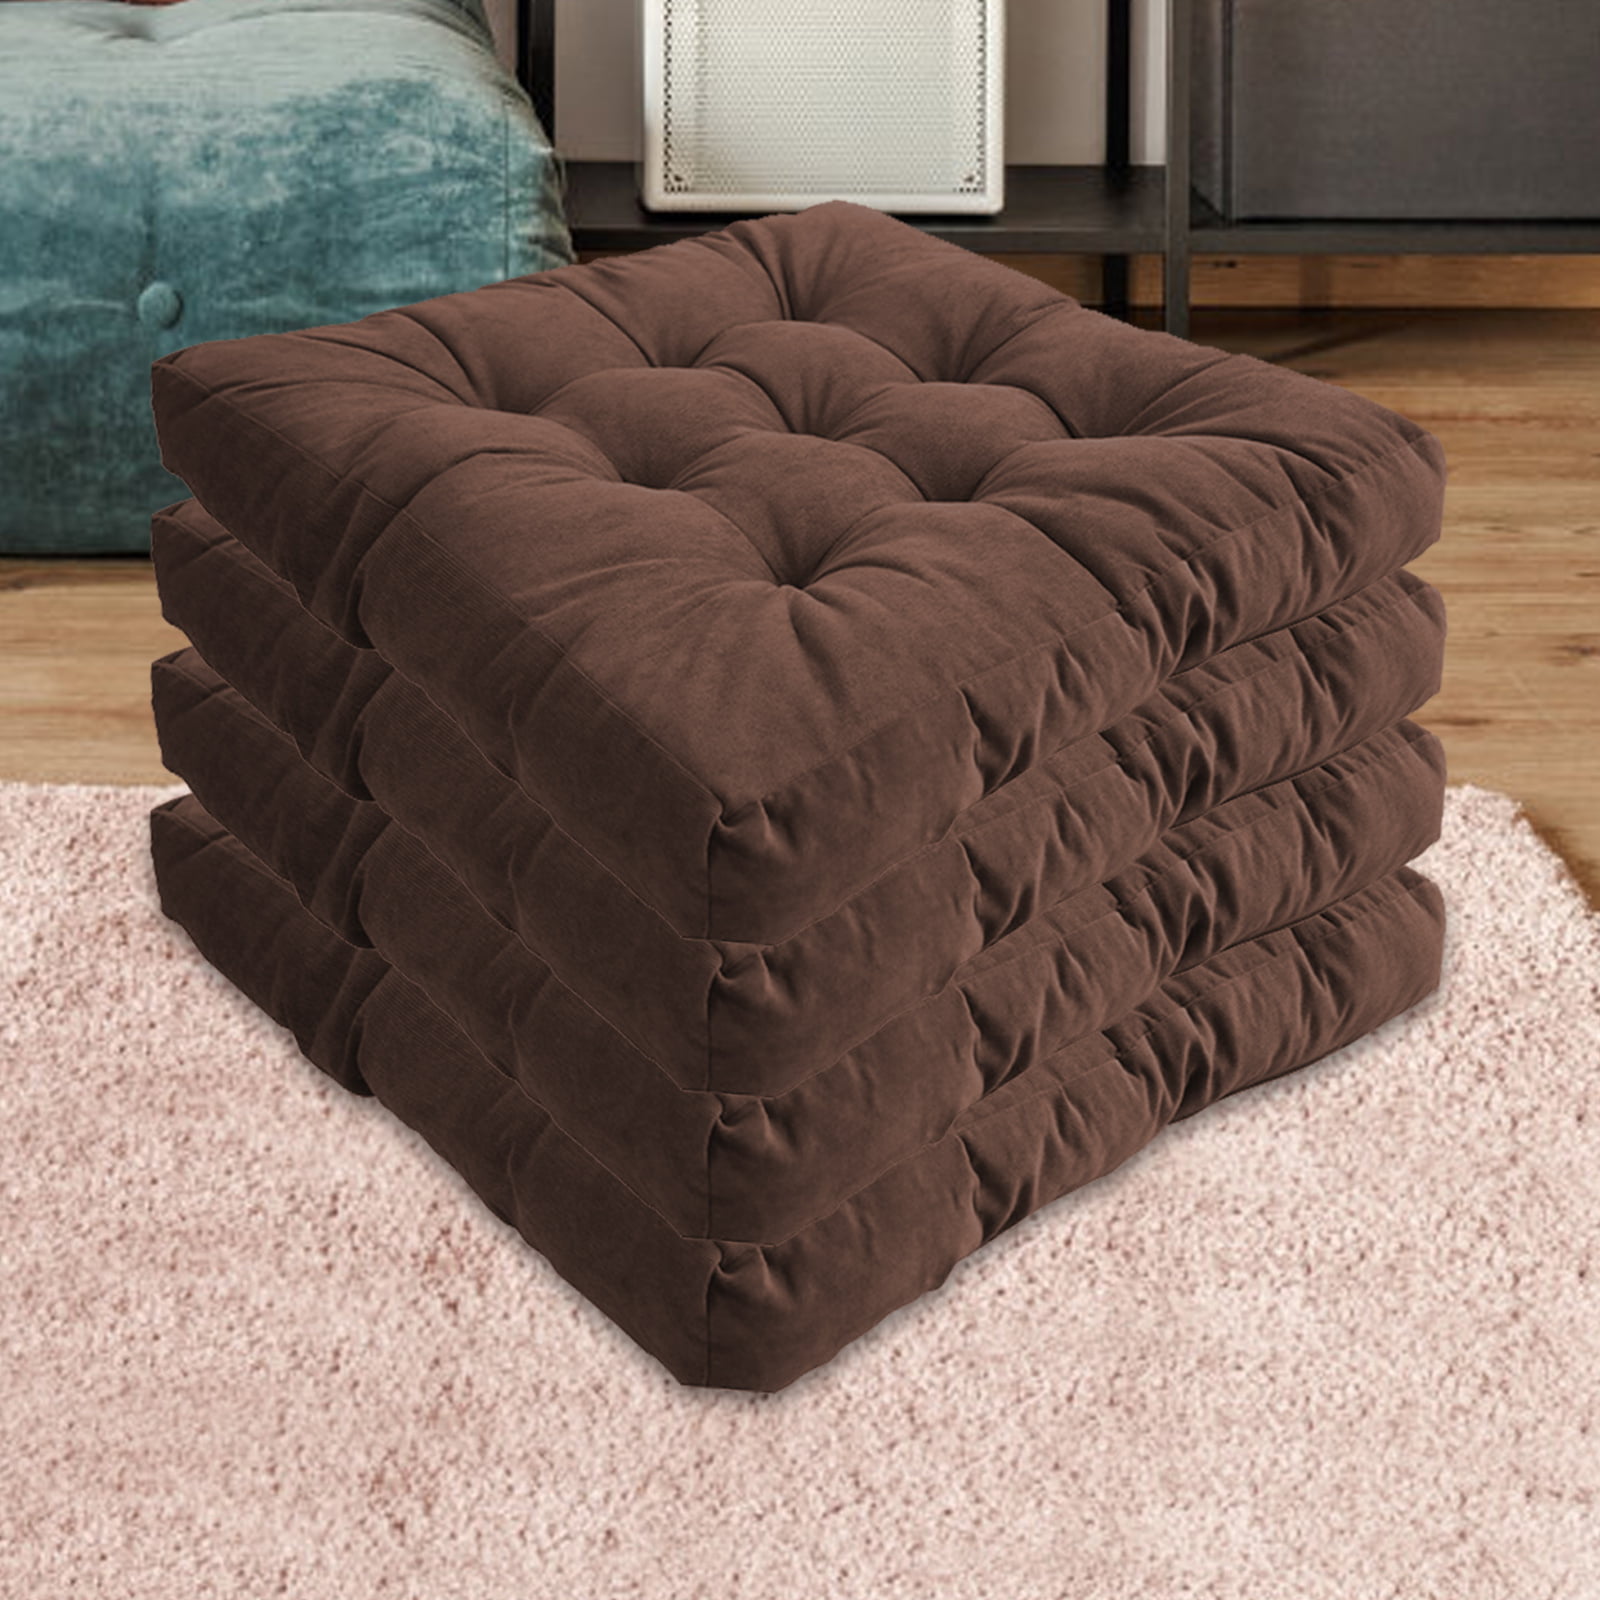  Verpert Square Thick Floor Seating Cushions,Solid Thick Tufted  Cushion Meditation Pillow for Sitting on Floor,Tatami Pad for Guests or  Kids Reading Nook,Yoga Living Room Sofa Balcony Outdoor (Beige) : Home 